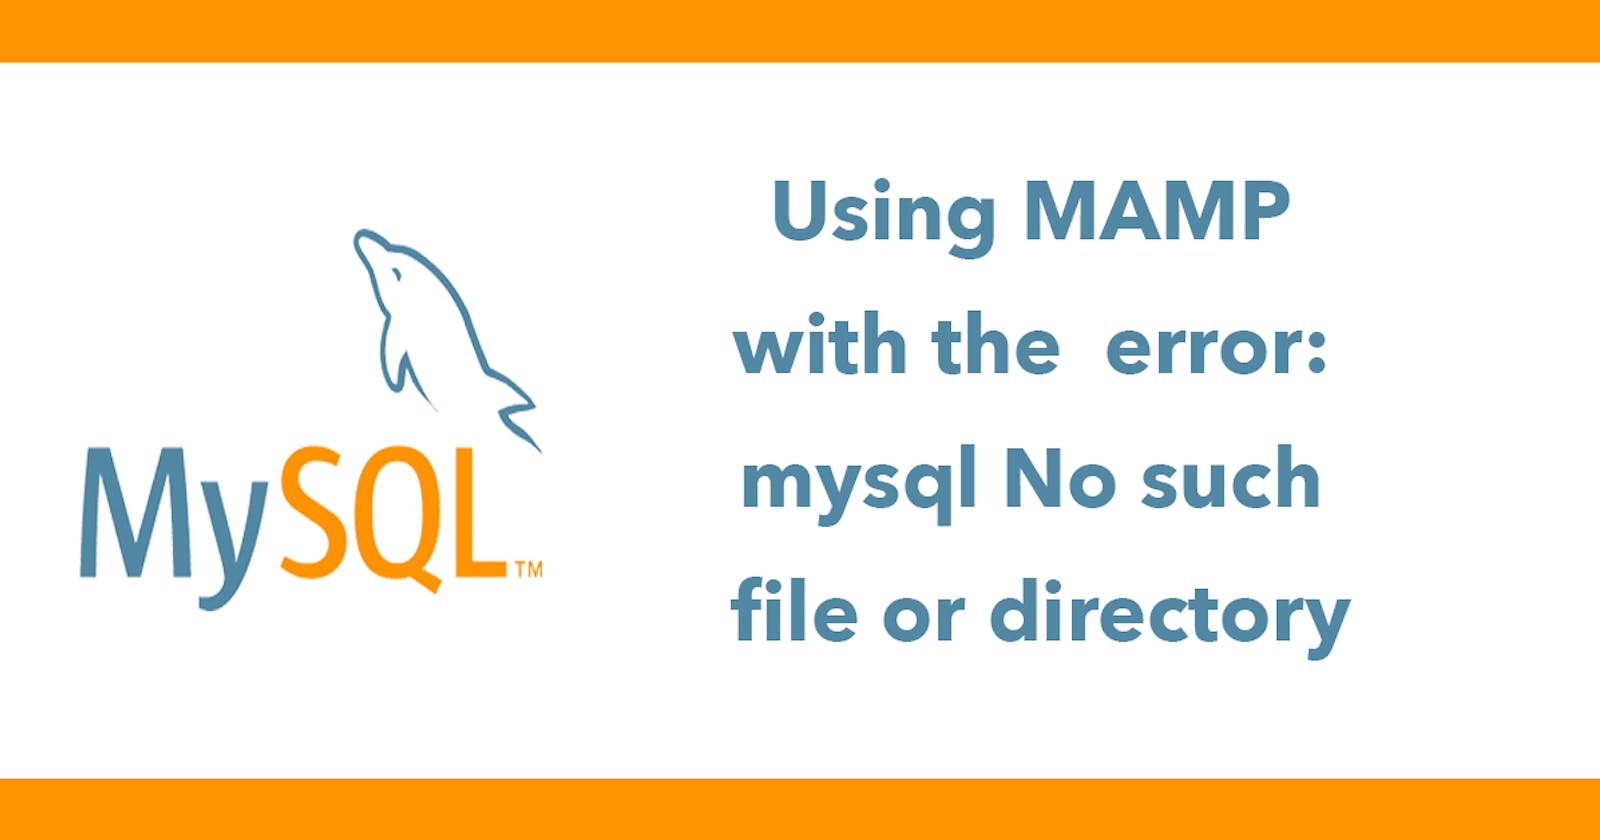 Using MAMP and dealing with the error: mysql No such file or directory